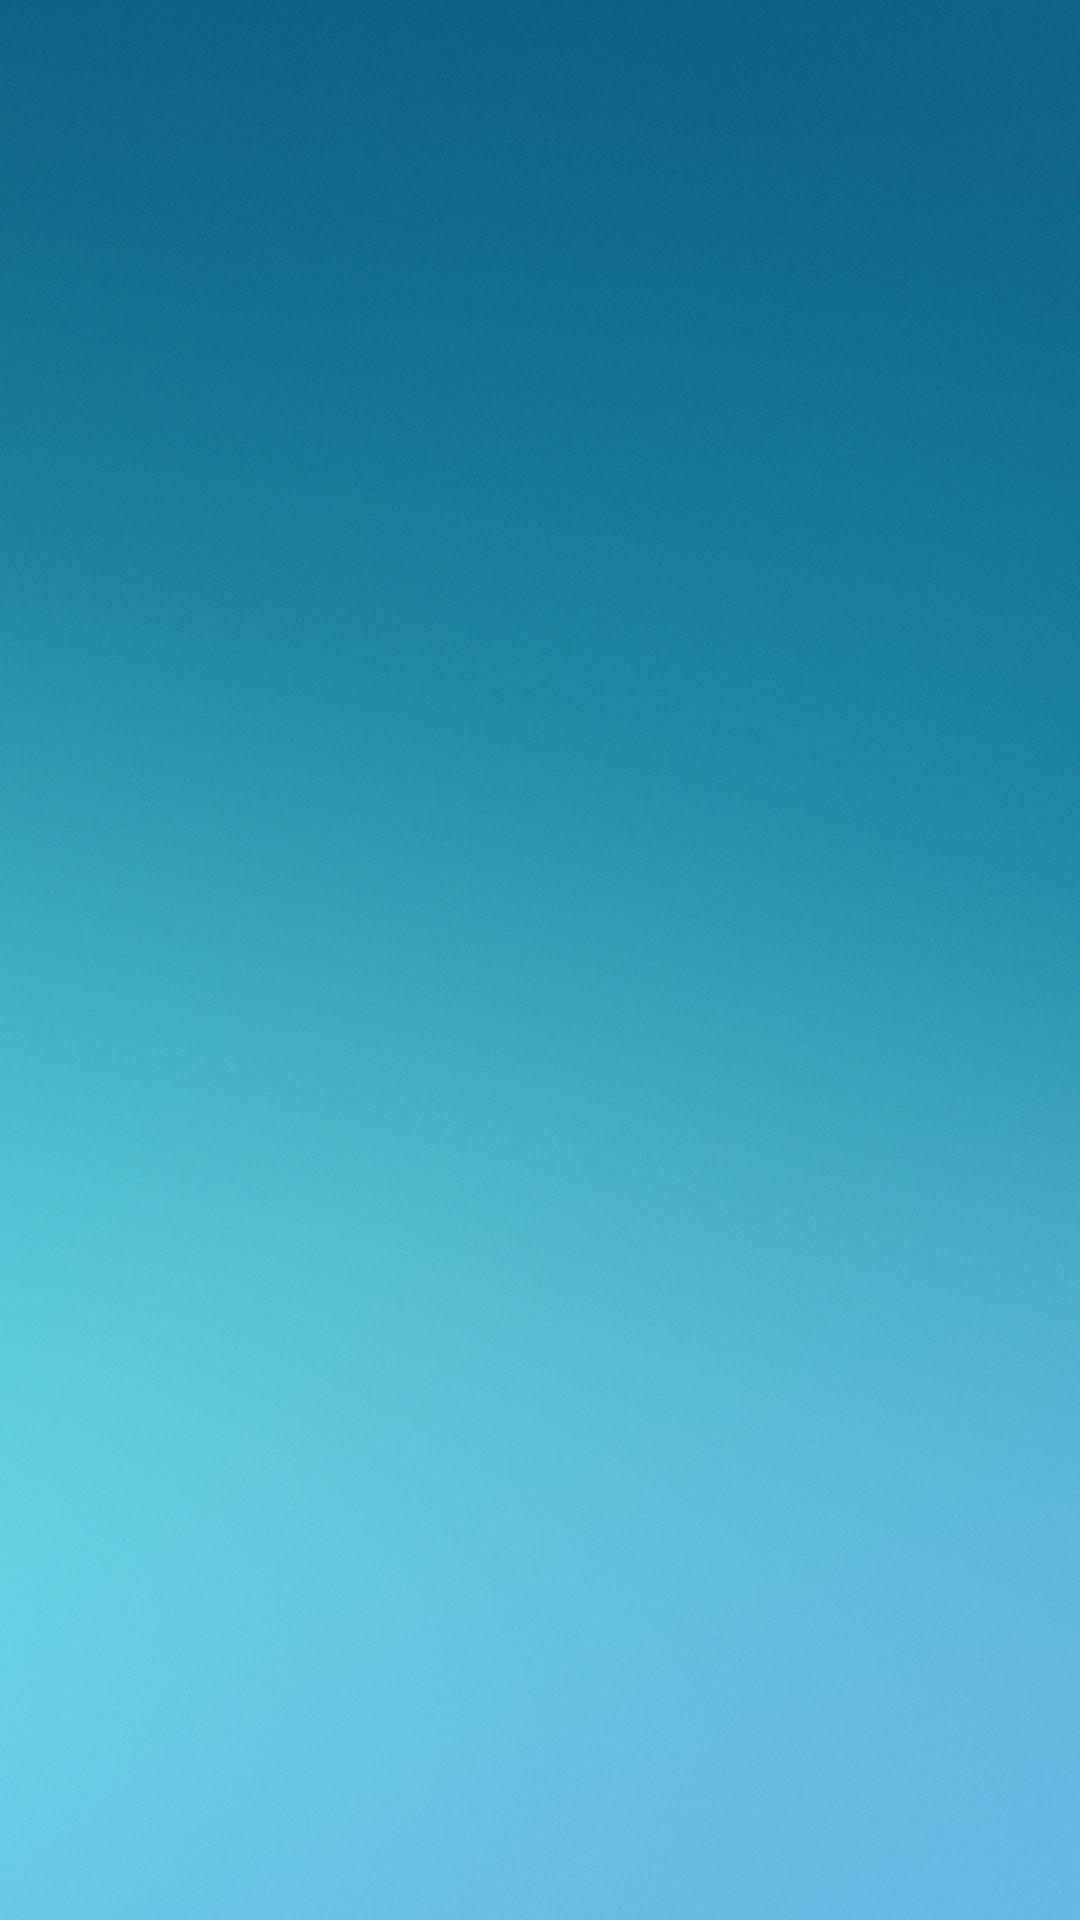 Pure Blue 4K Wallpapers - Top Free Pure Blue 4K Backgrounds ...